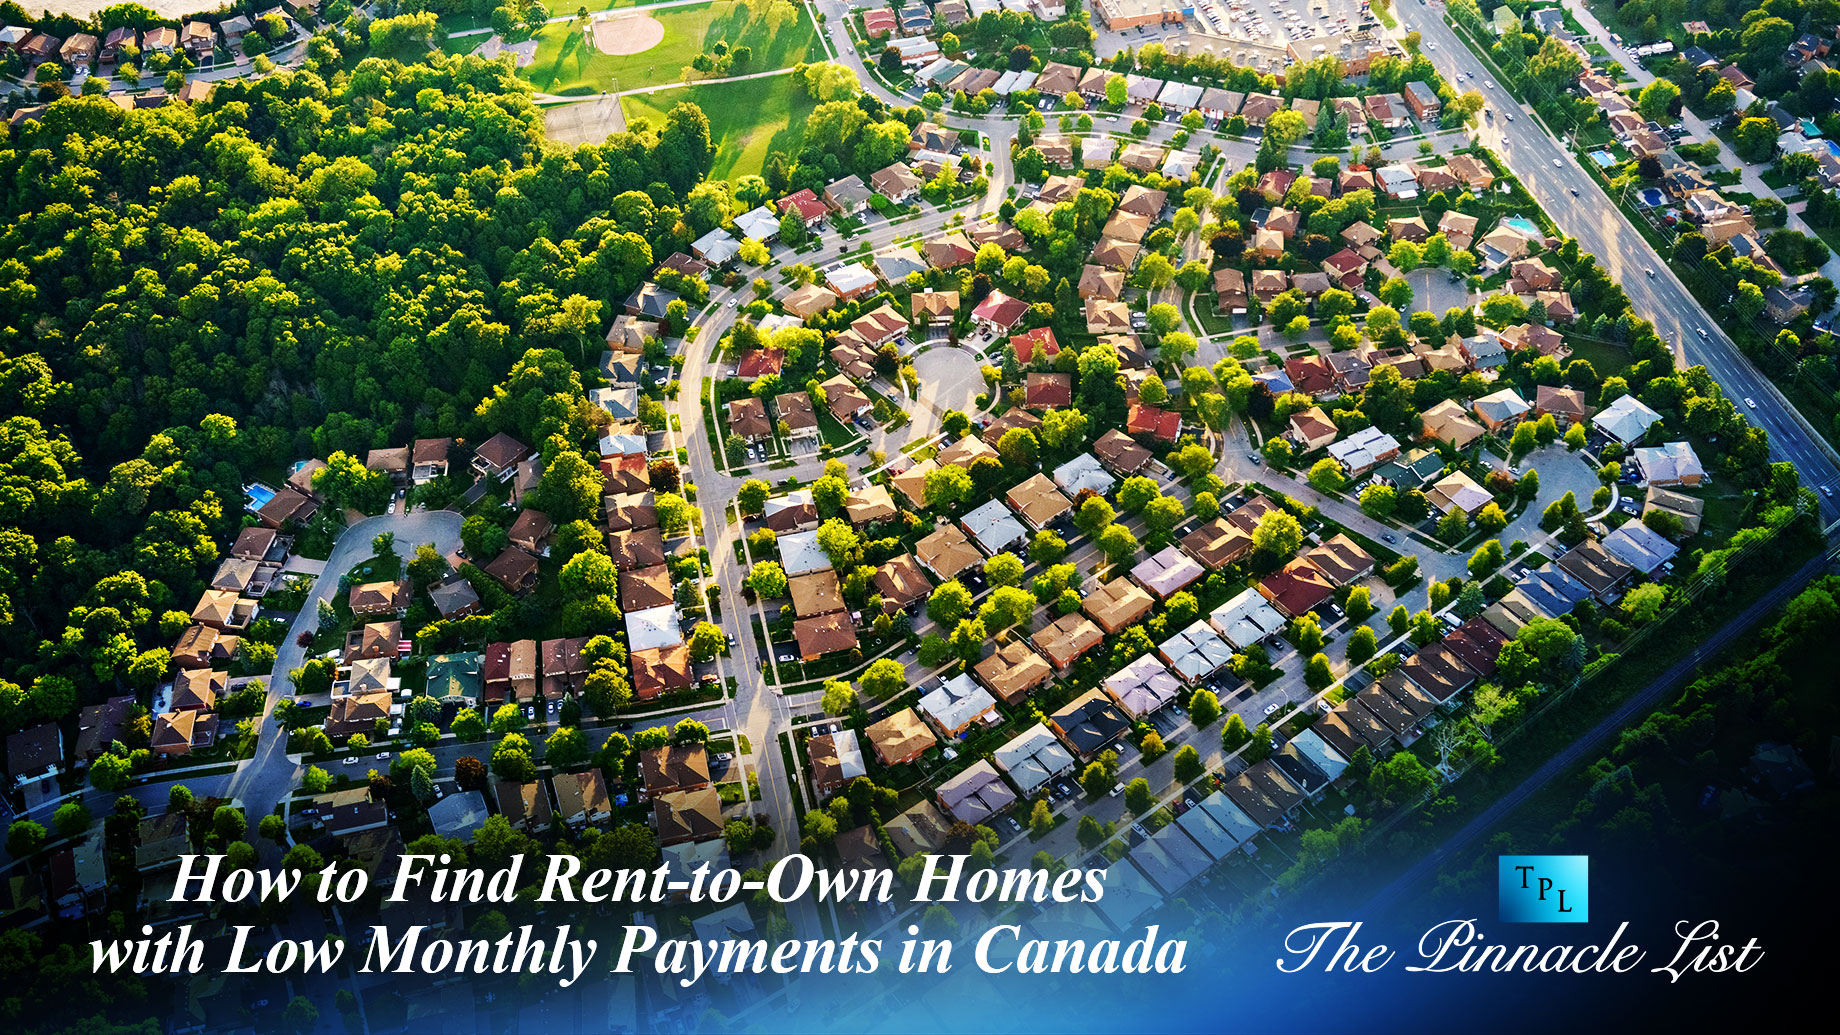 How to Find Rent-to-Own Homes with Low Monthly Payments in Canada